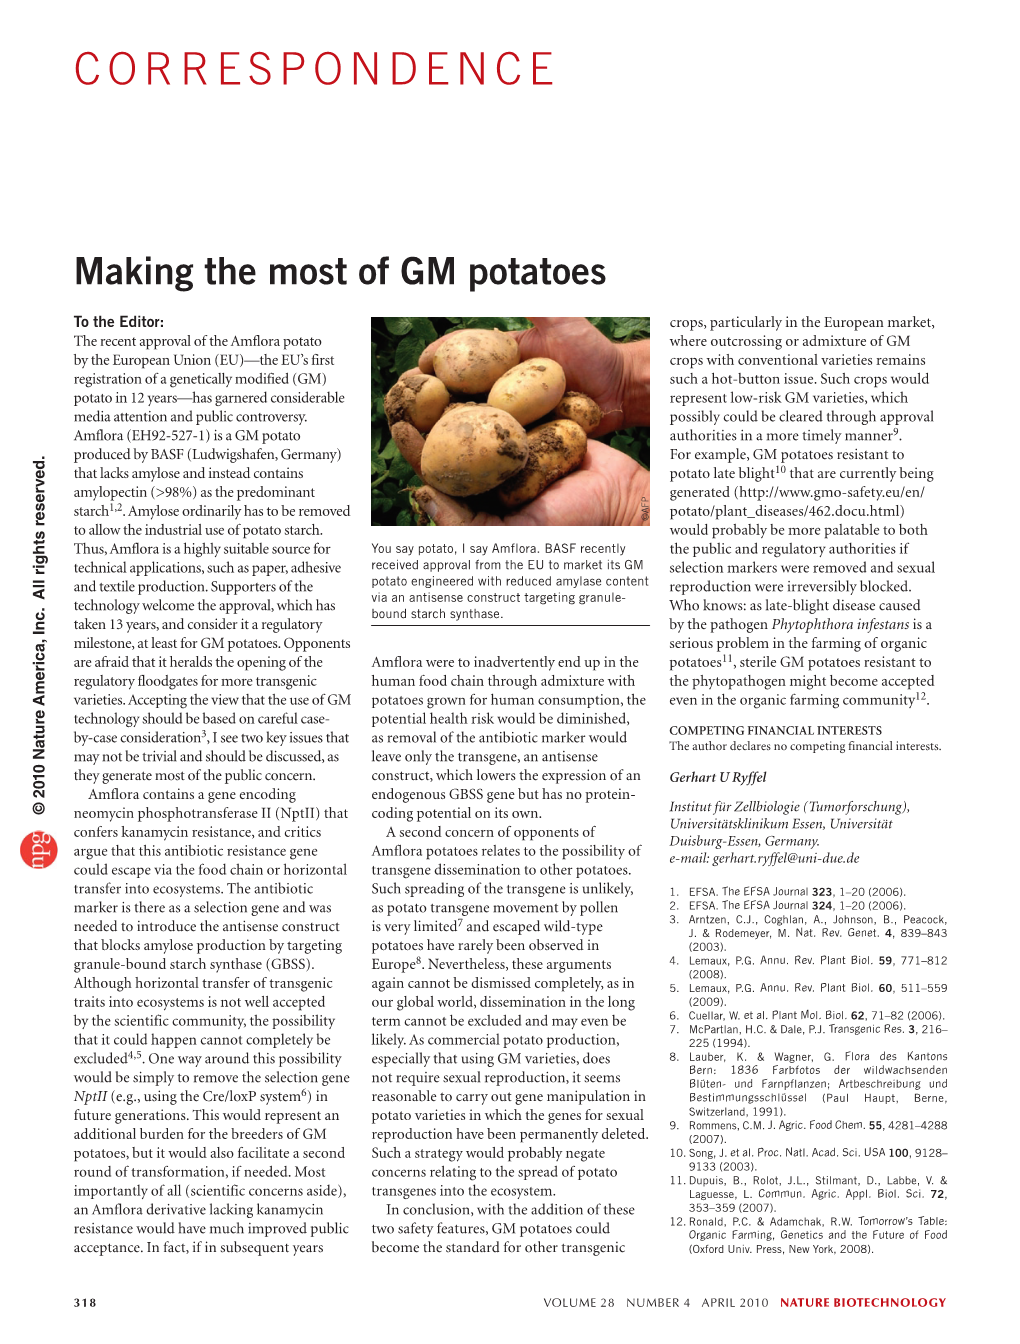 Making the Most of GM Potatoes